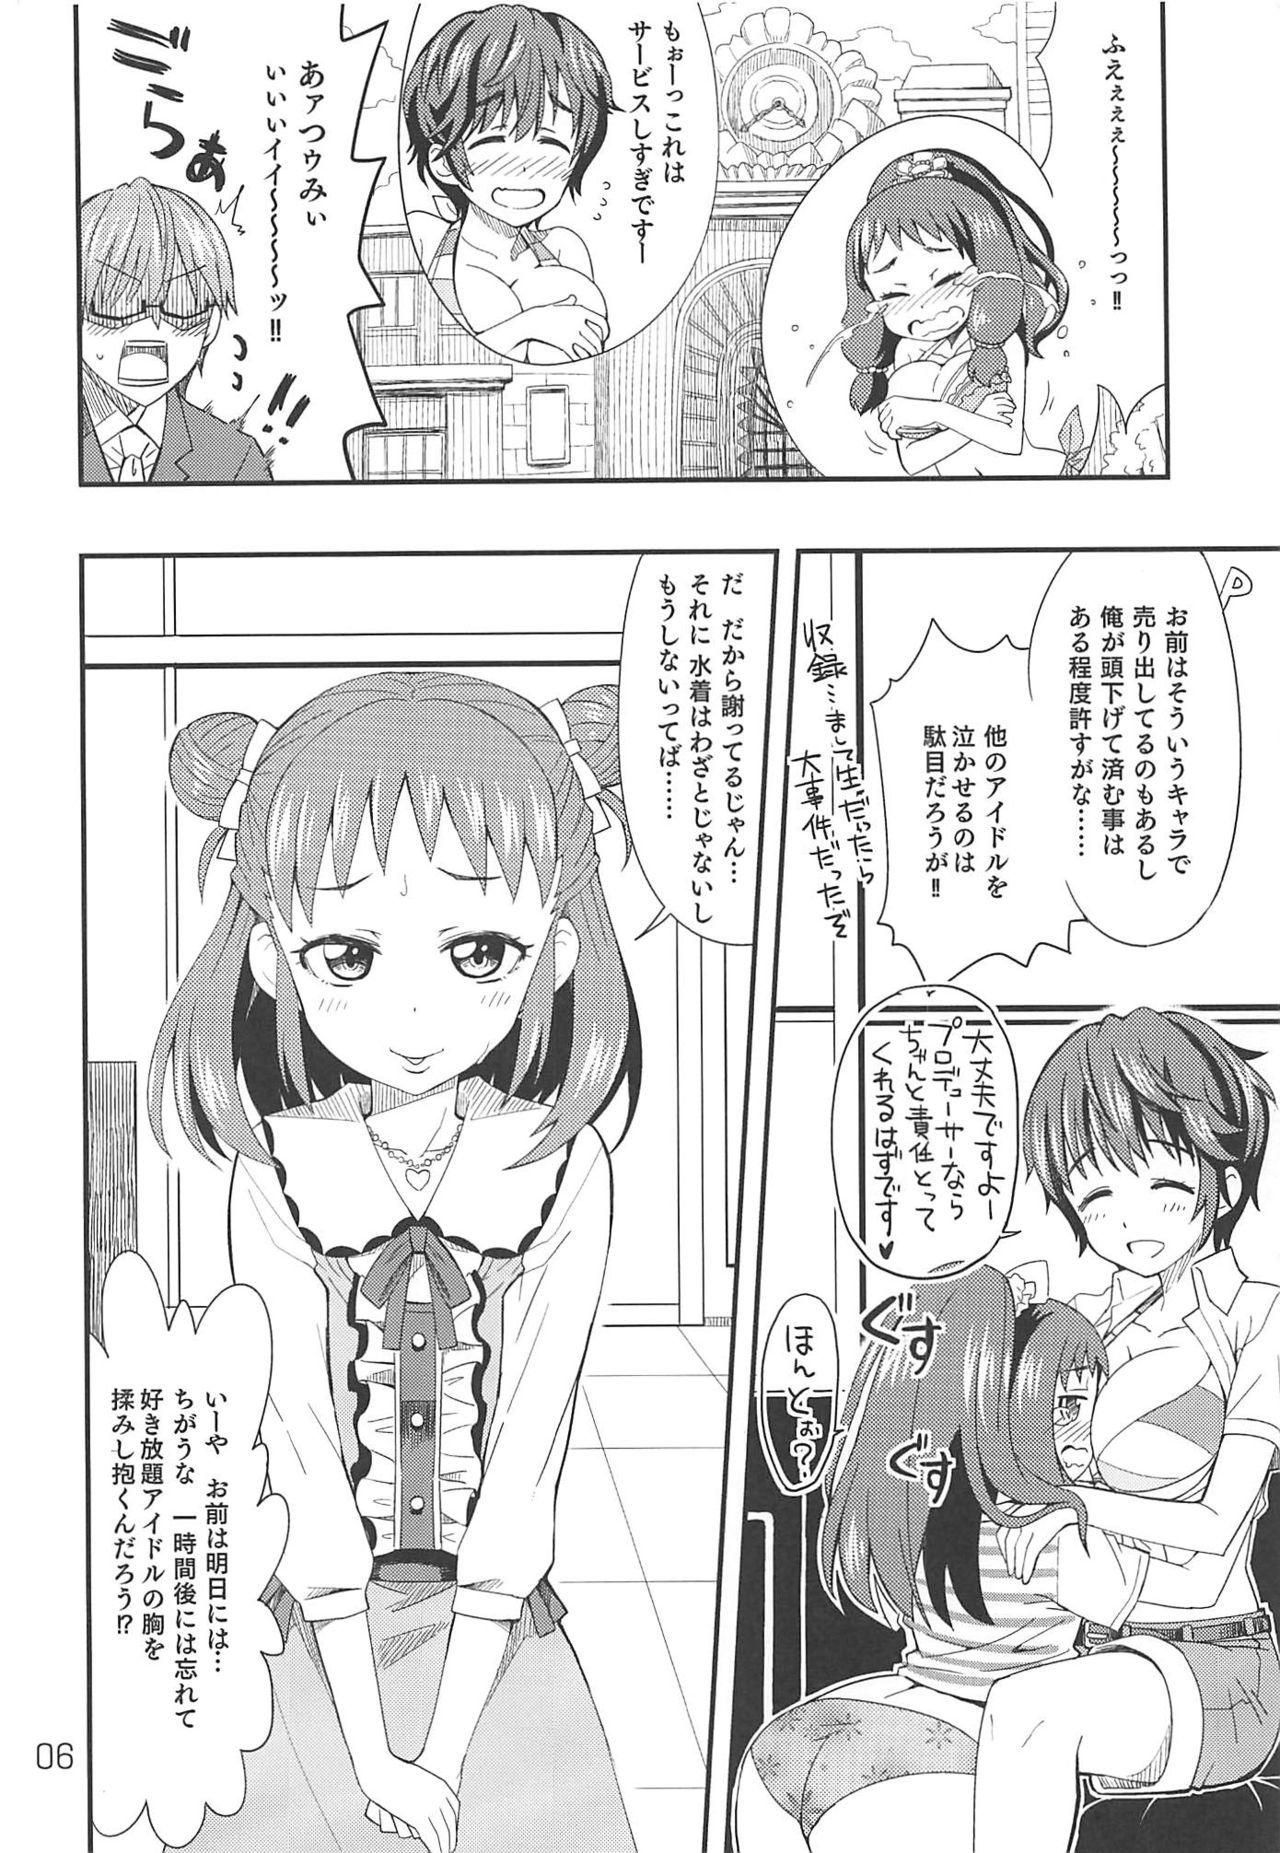 Freak Wotometicm@ster - The idolmaster Por - Page 5